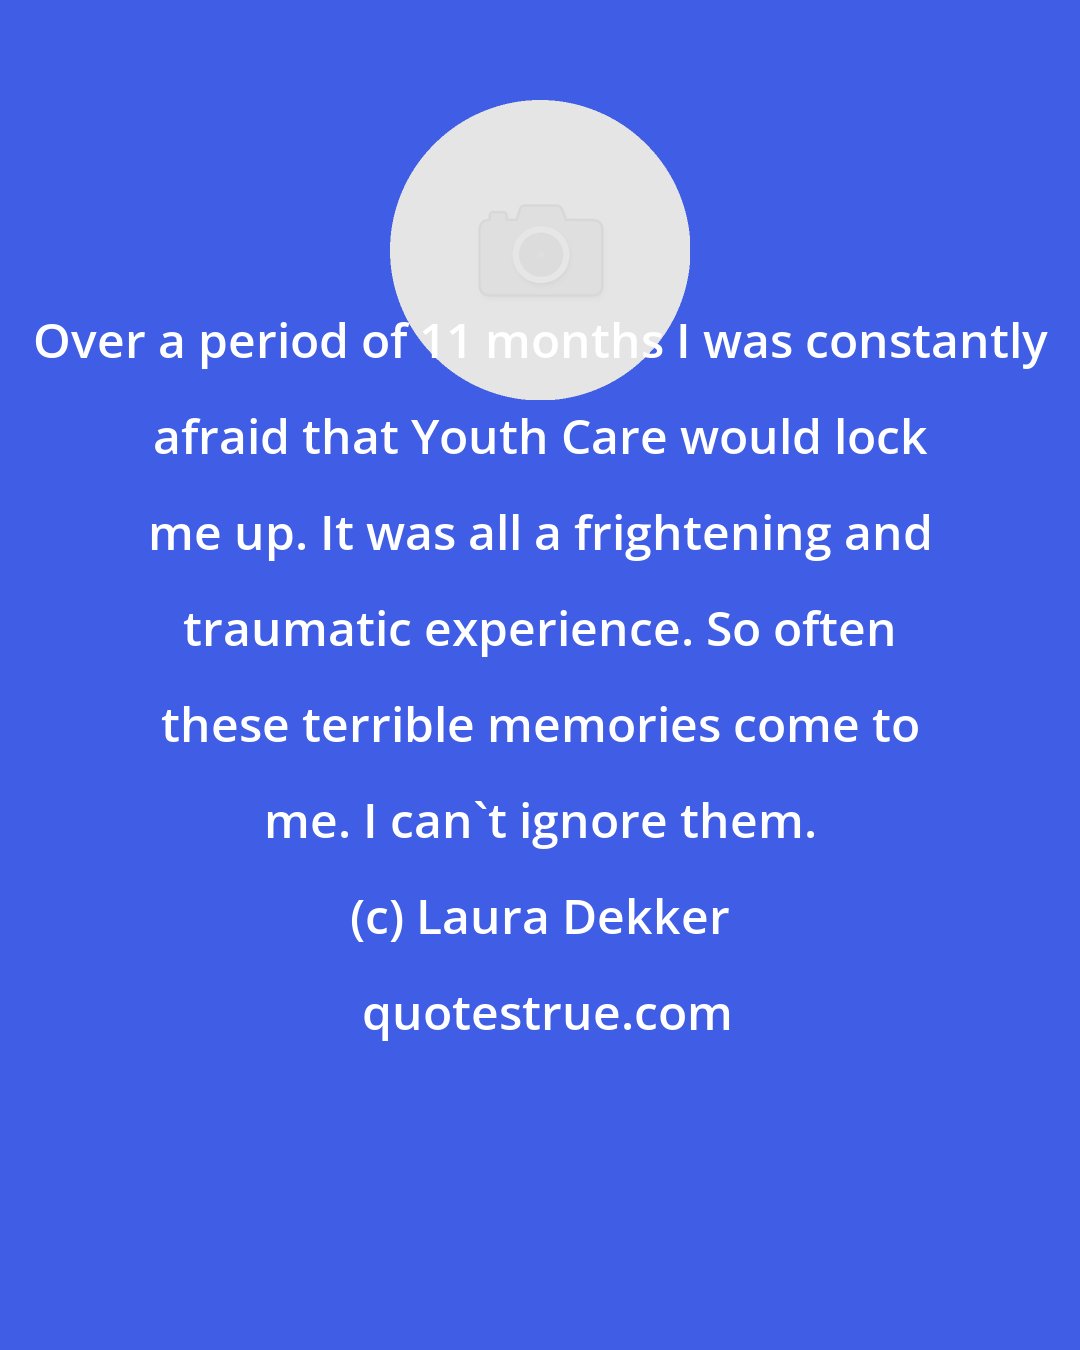 Laura Dekker: Over a period of 11 months I was constantly afraid that Youth Care would lock me up. It was all a frightening and traumatic experience. So often these terrible memories come to me. I can't ignore them.